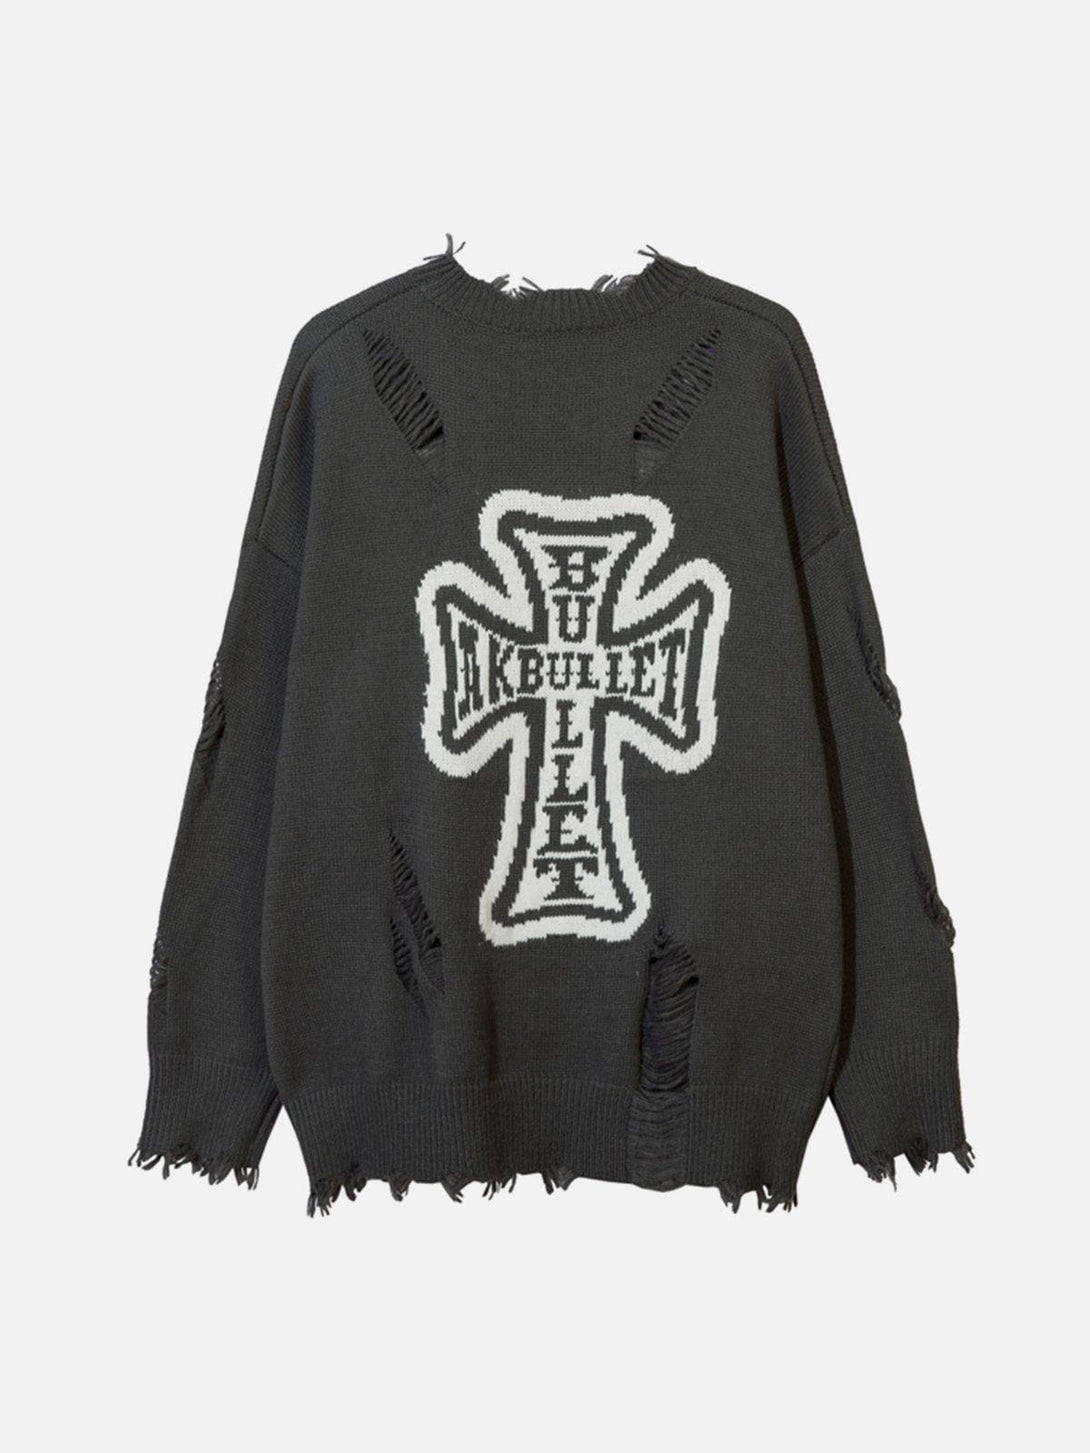 Ellesey - Cross Graphic Raw Edge Sweater-Streetwear Fashion - ellesey.com